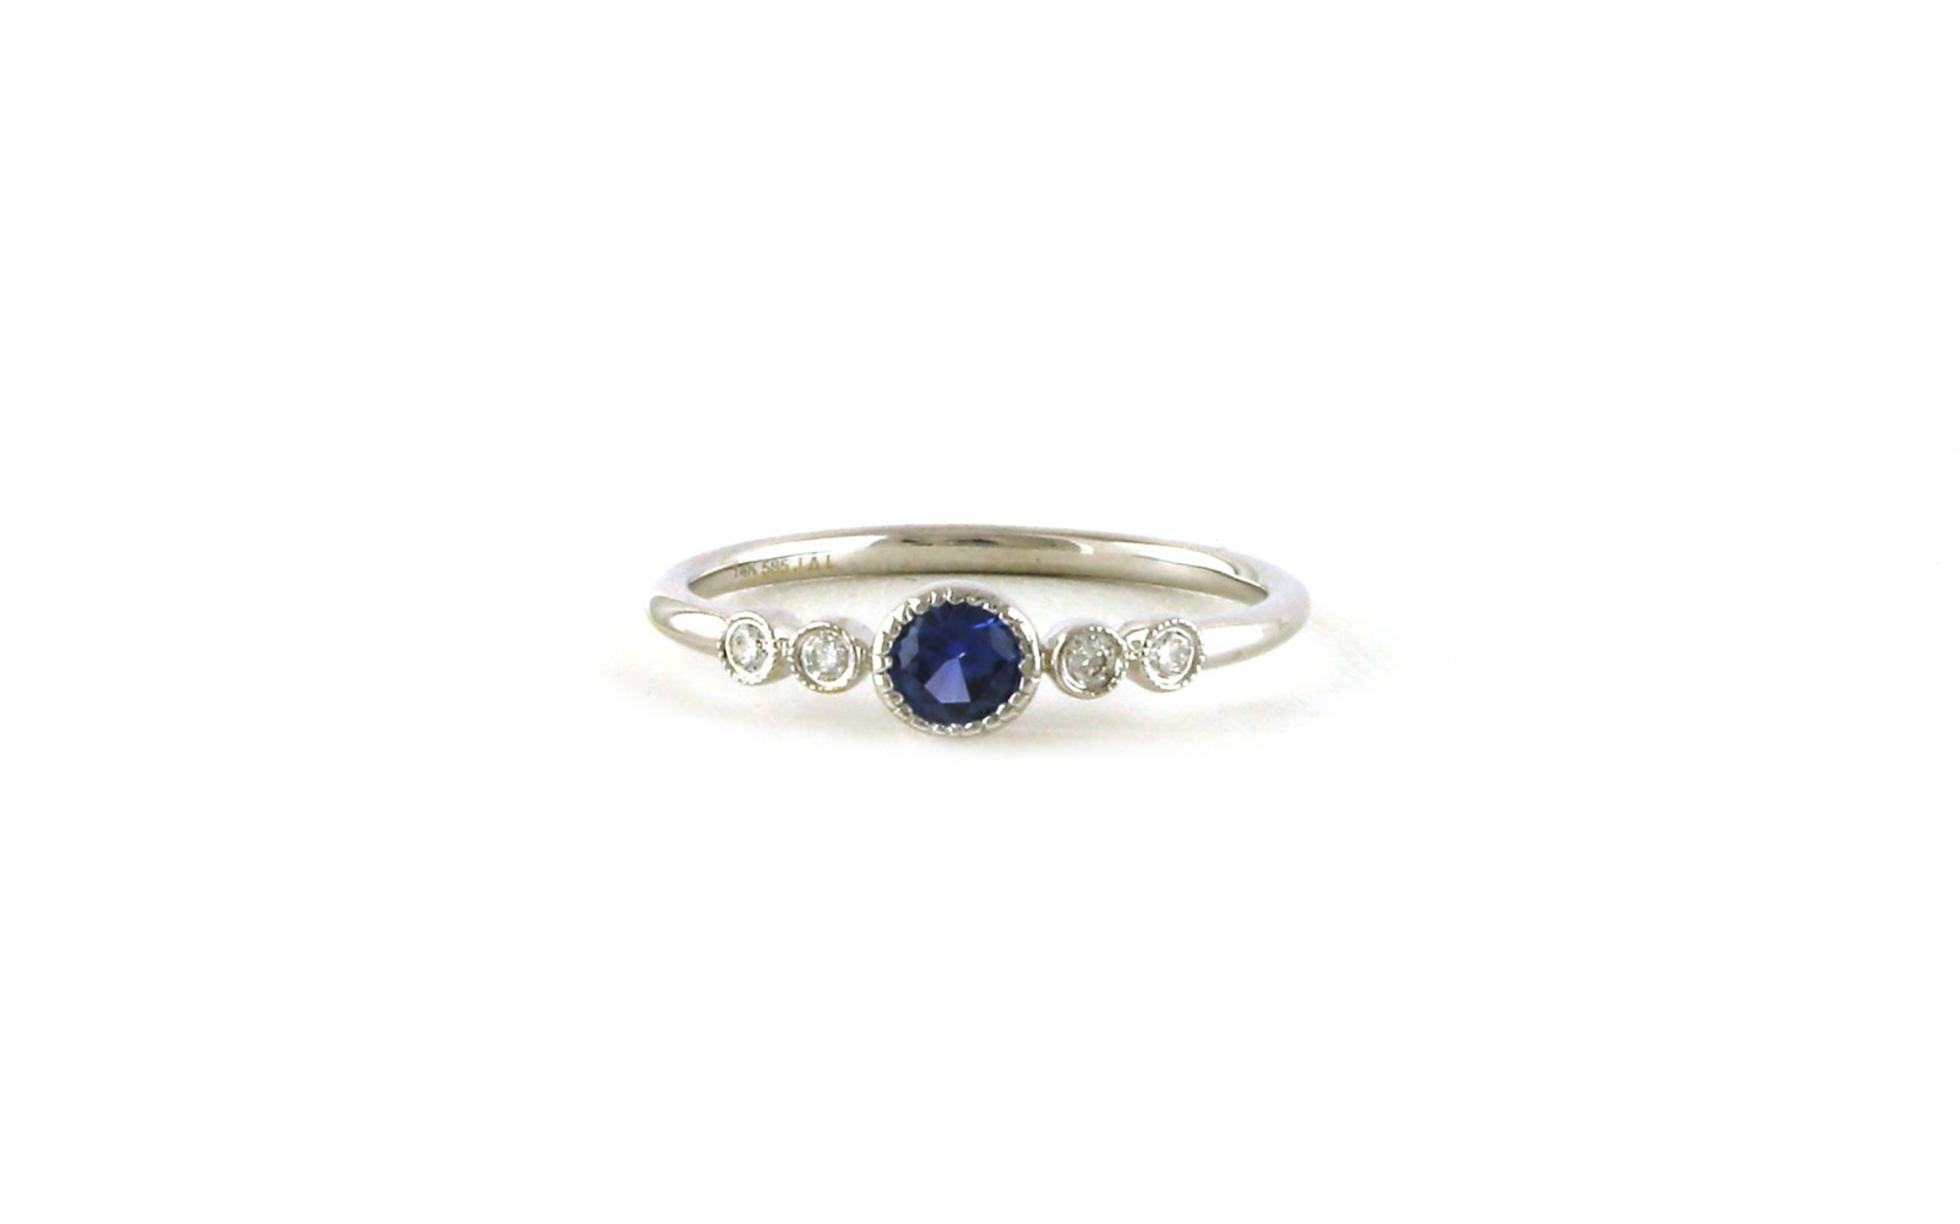 5-Stone Bezel-set Montana Yogo Sapphire and Diamond Ring in White Gold (0.36cts TWT)